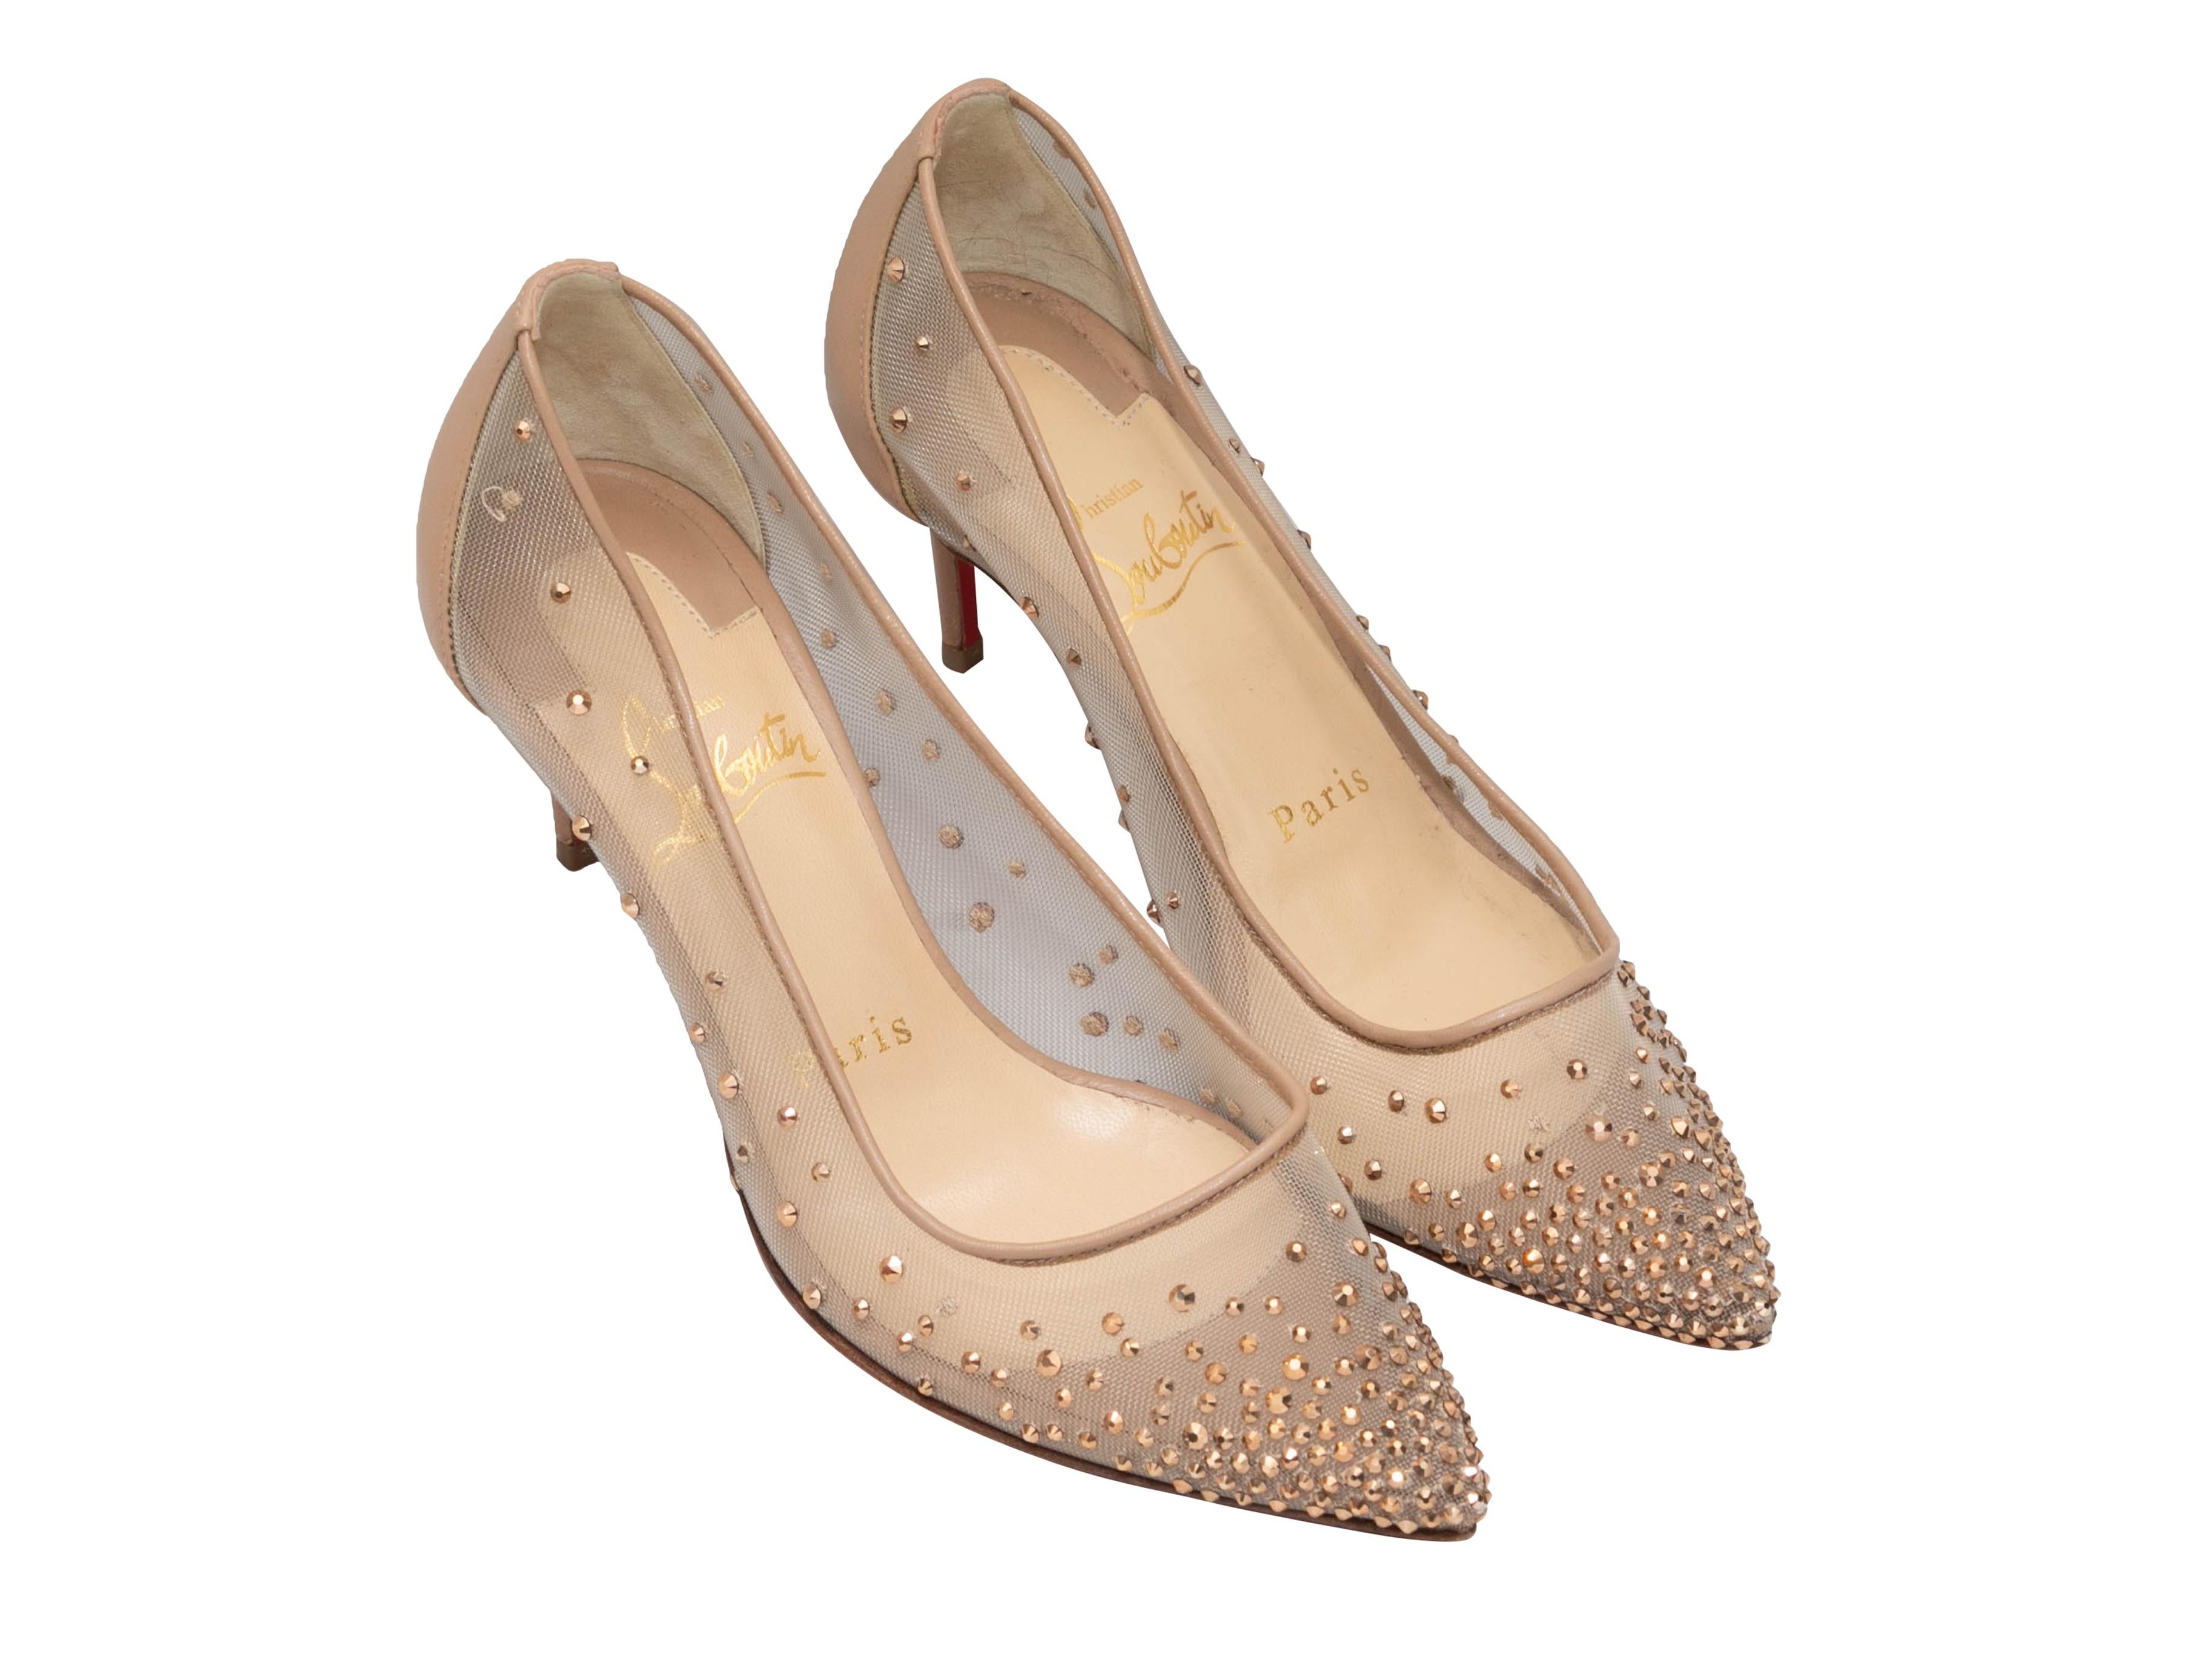 Beige leather and mesh Follies strass crystal-embellished pointed-toe pumps by Christian Louboutin. 2.5